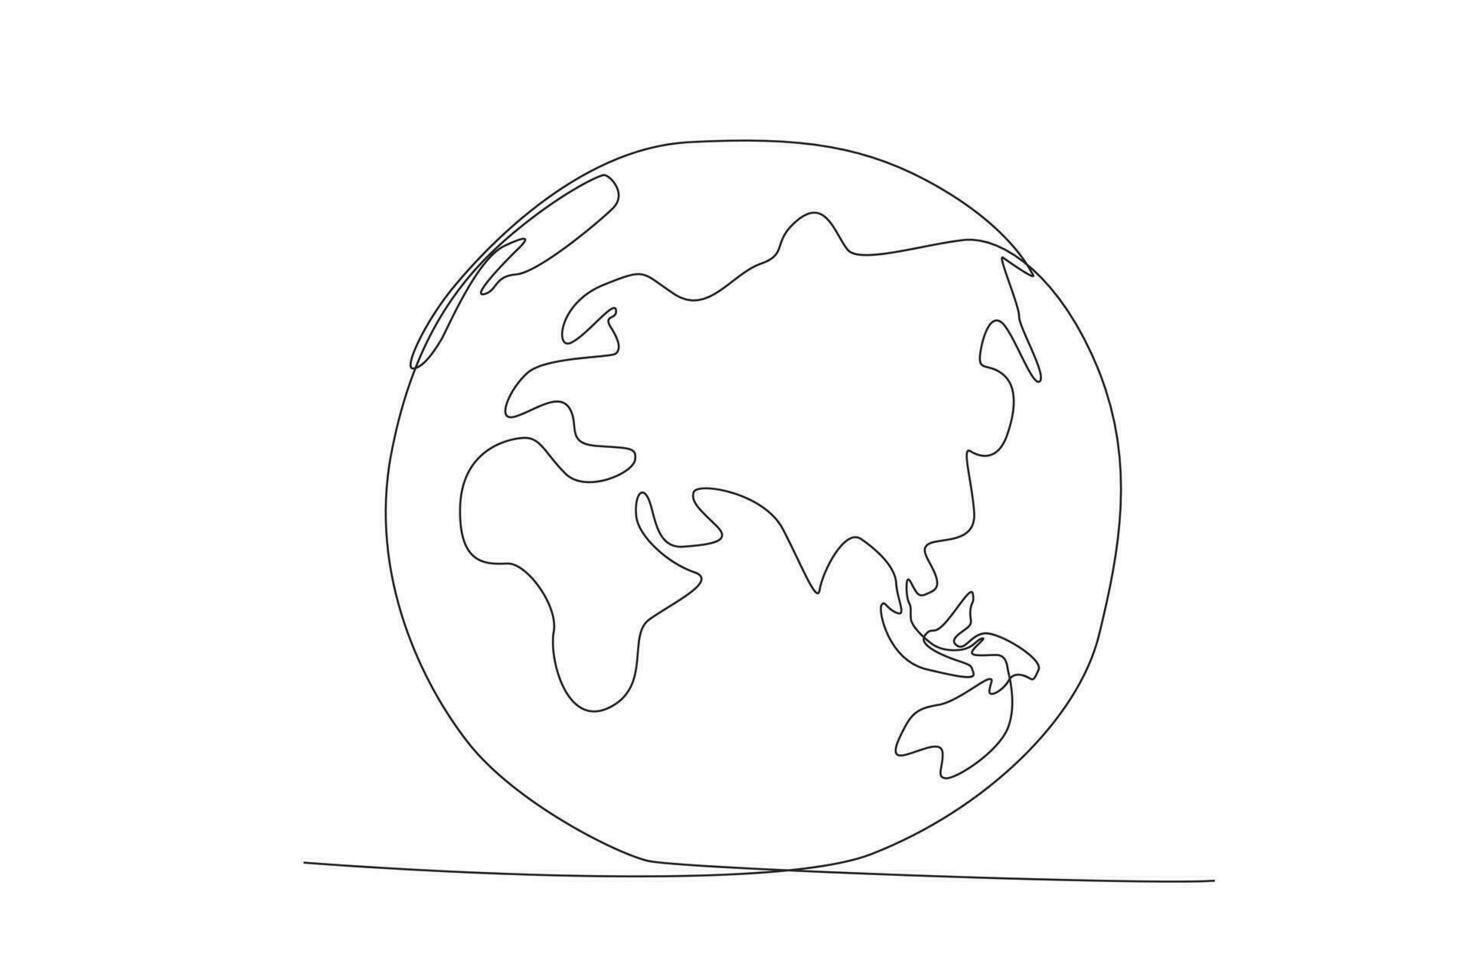 earth globes. Single continuous line round global map geography graphic icon. Simple one line draw doodle for education concept. Isolated vector illustration minimalist design.